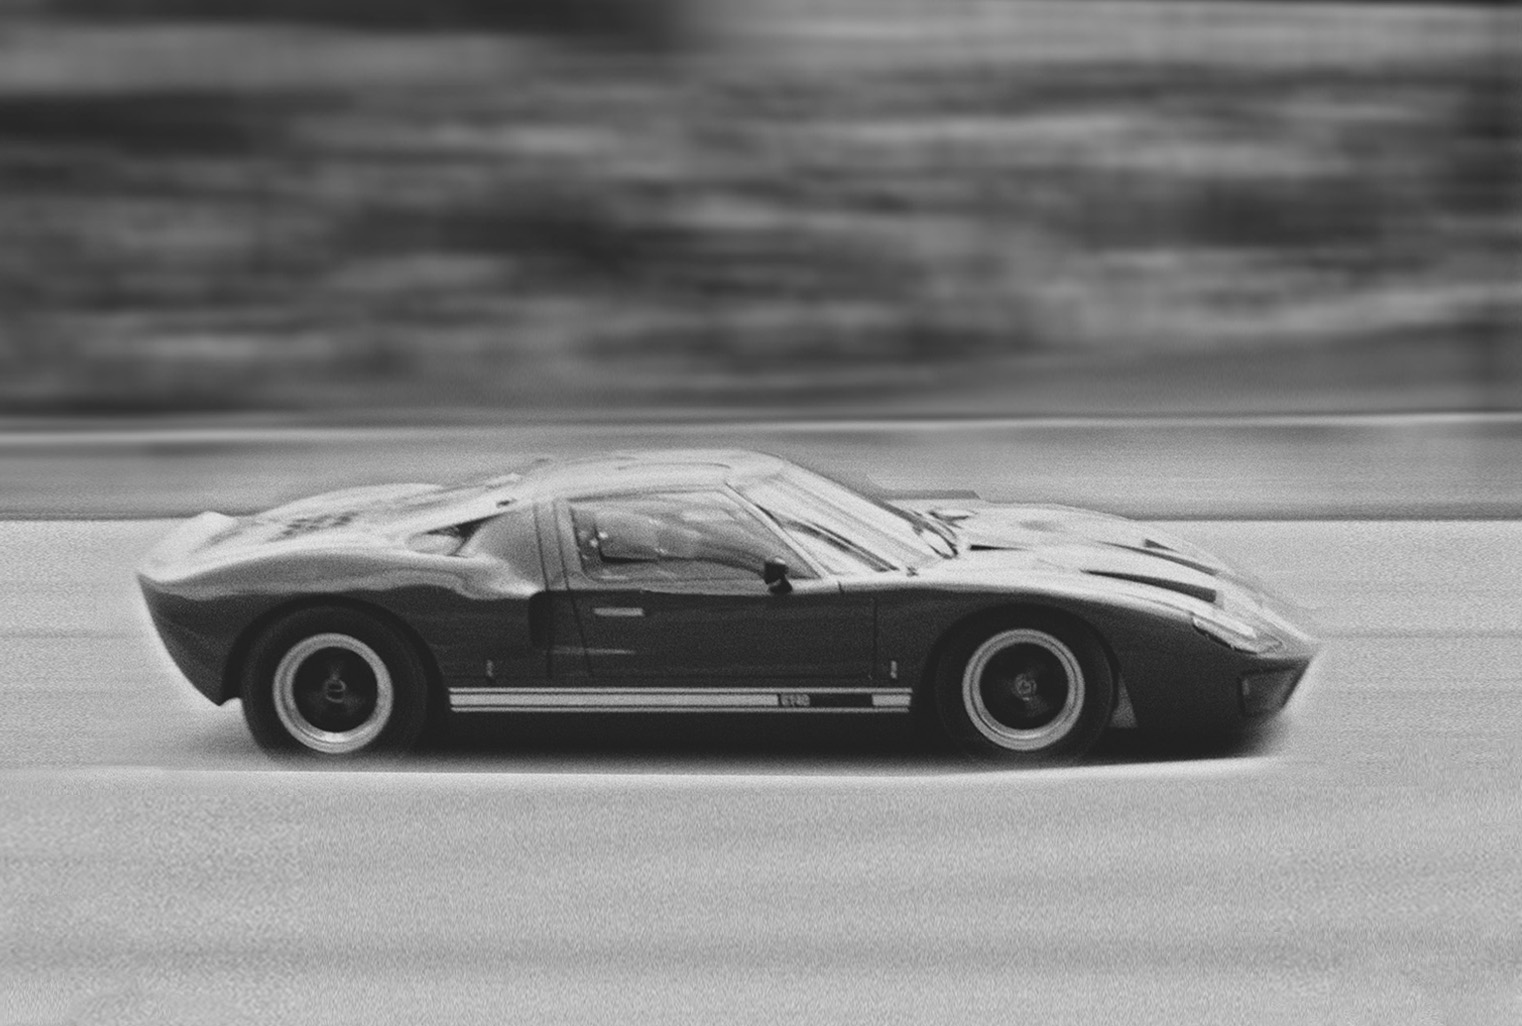 From GT40 cars for sale today to historical GT40 cars